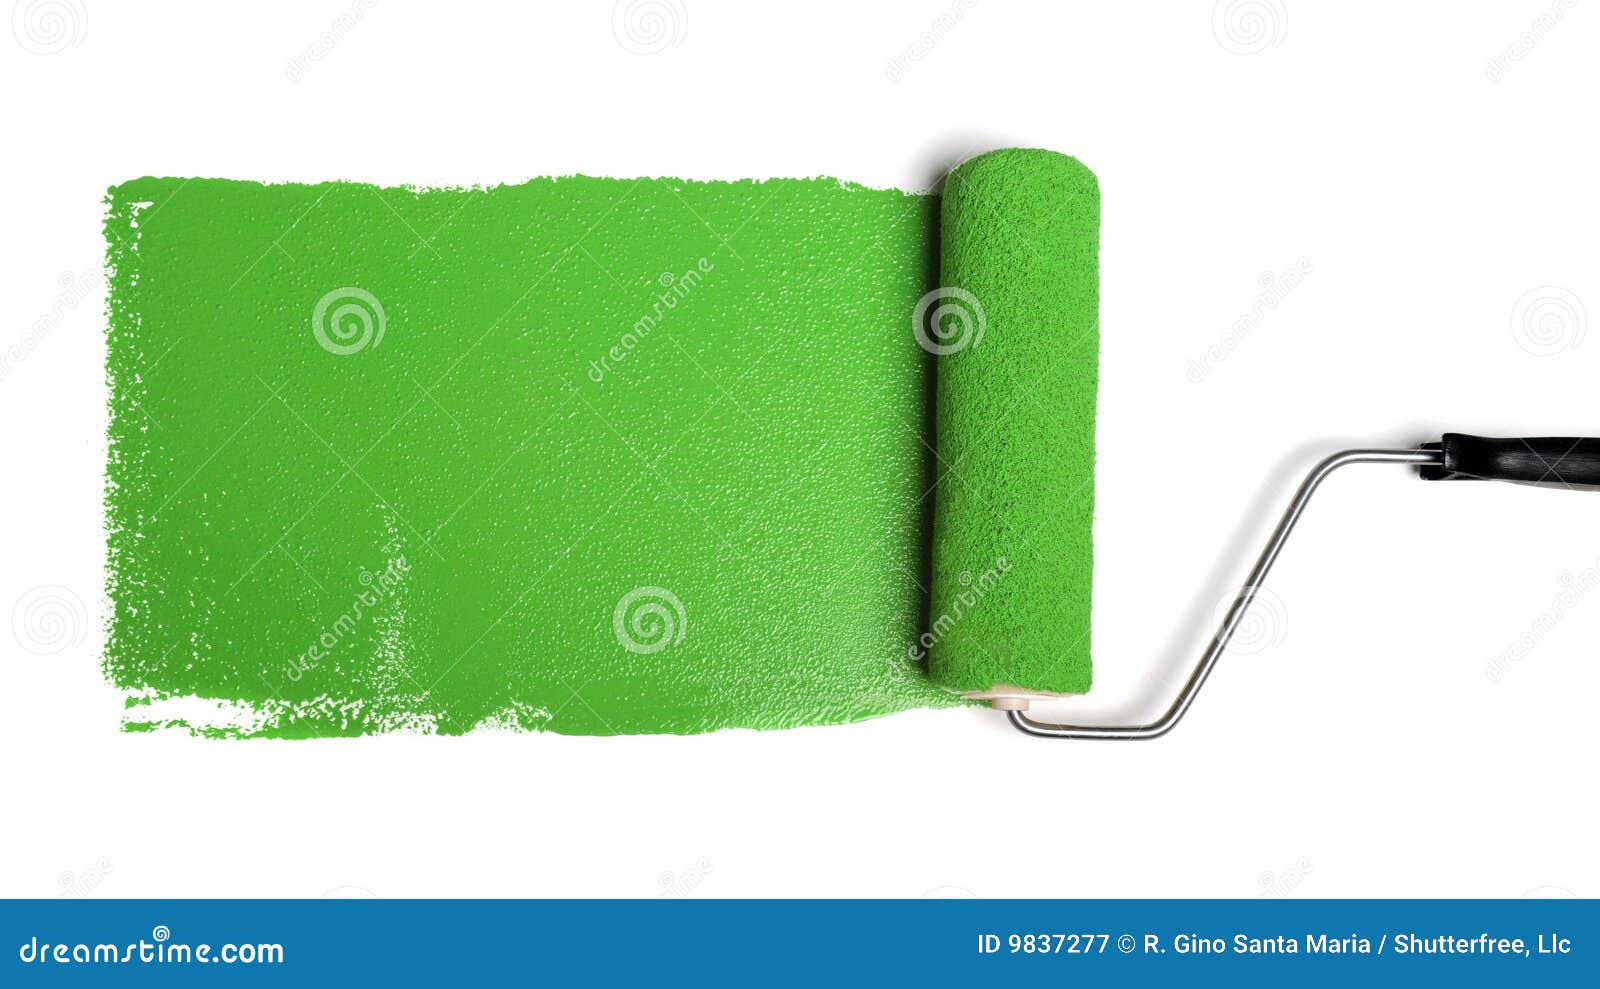 paint roller with green paint